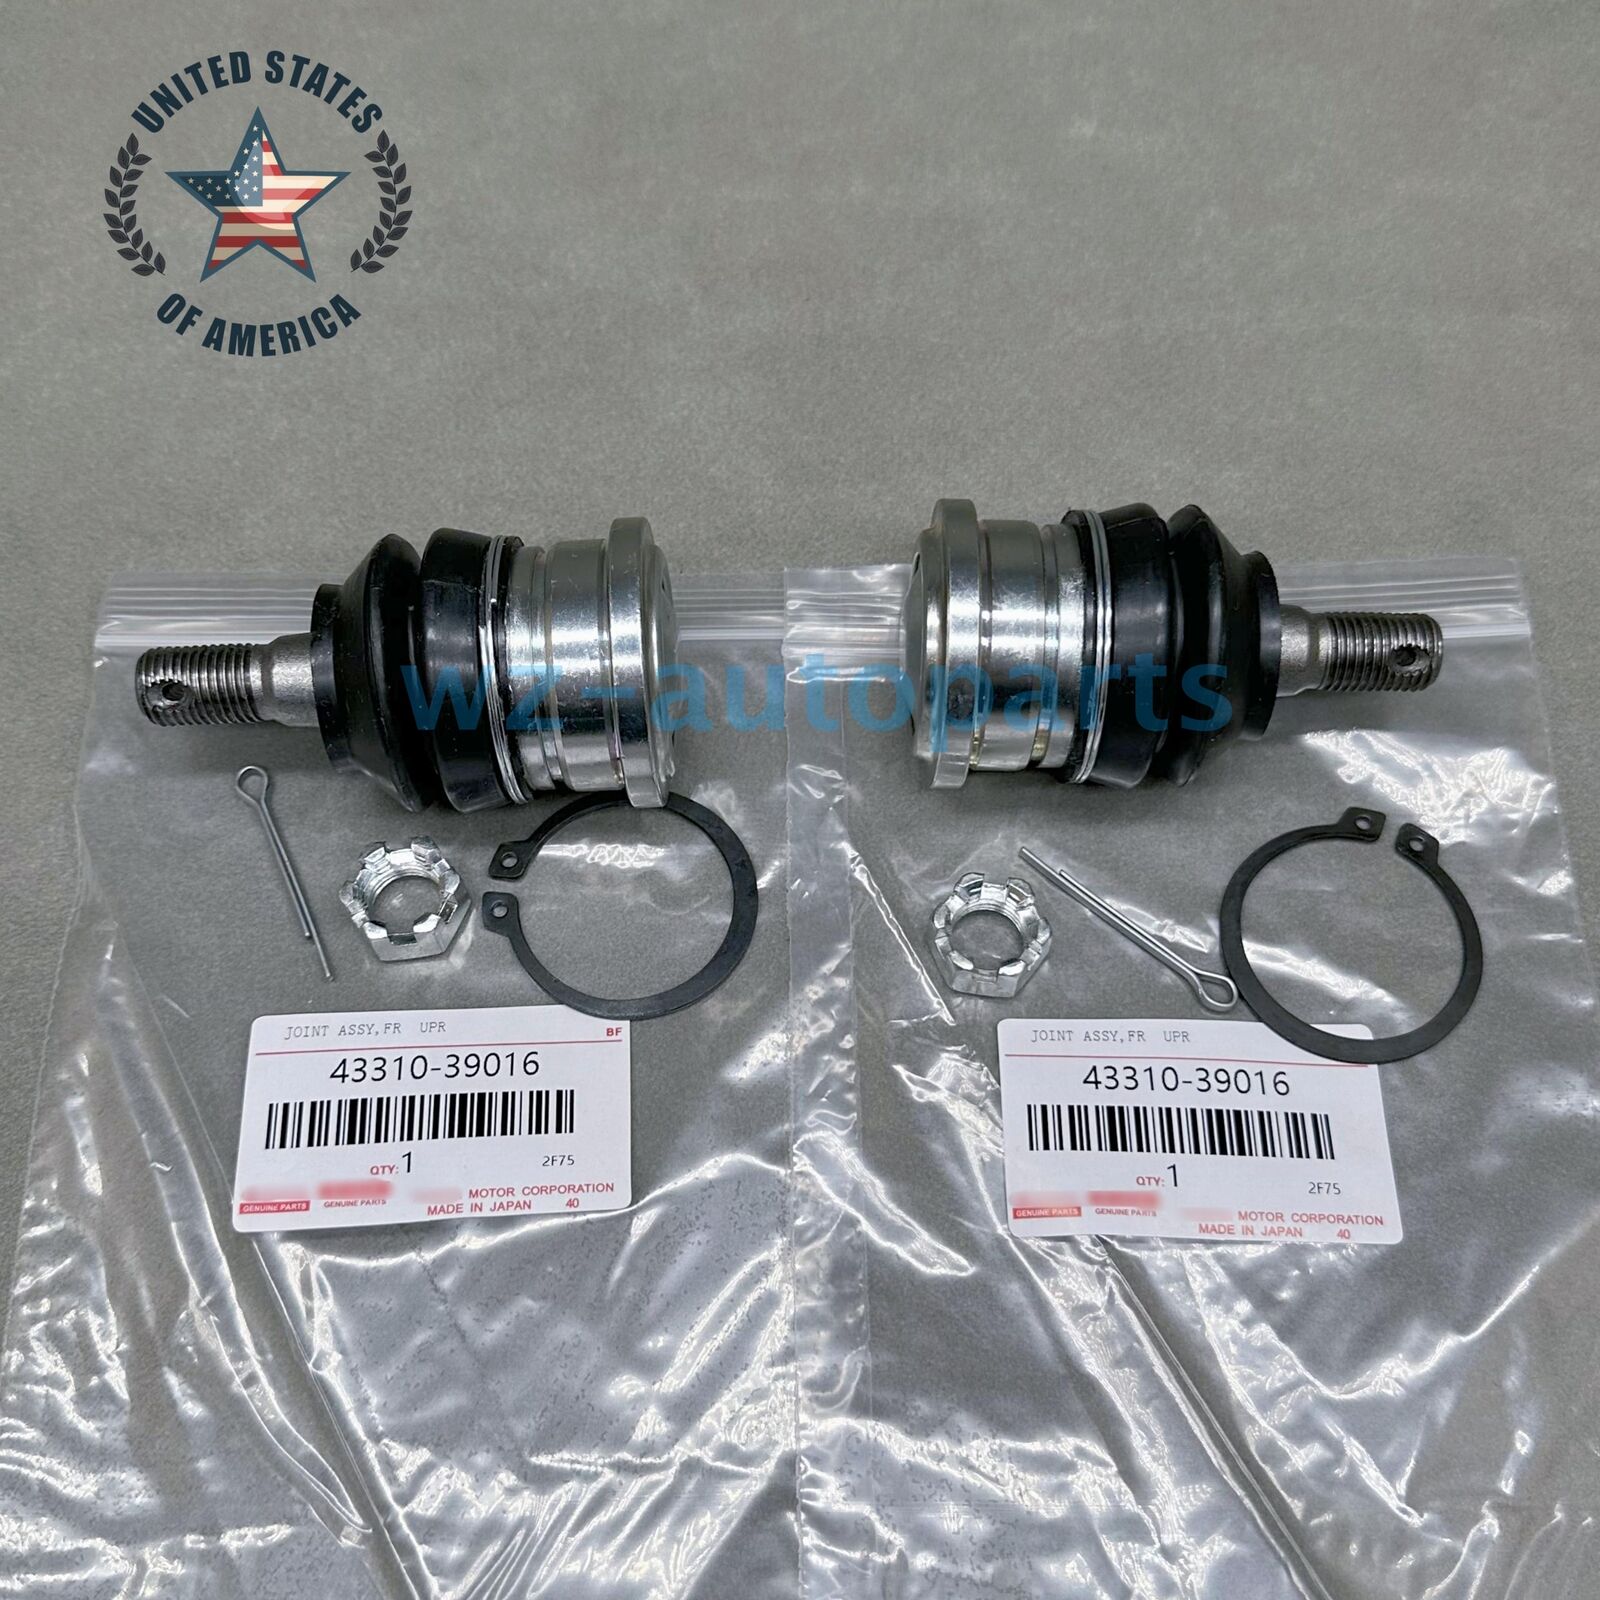 OEM RH & LH FRONT UPPER BALL JOINT SET FITS TOYOTA SEQUOIA 4RUNNER TACOMA TUNDRA